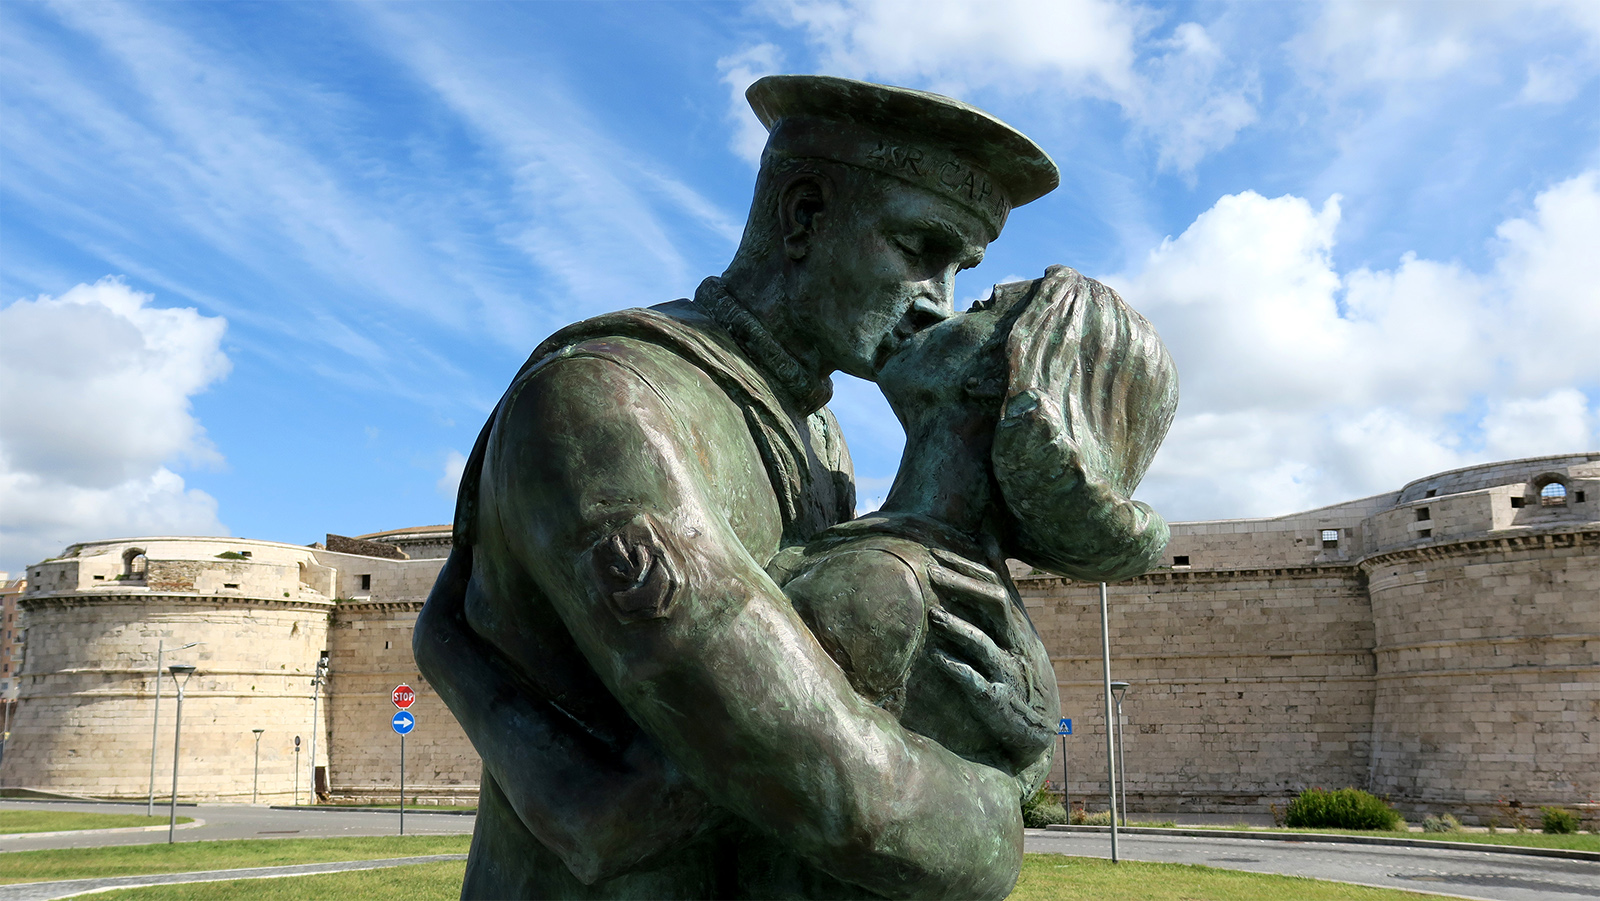 The statue “Kissing in Memory of a Port” in the foreground.